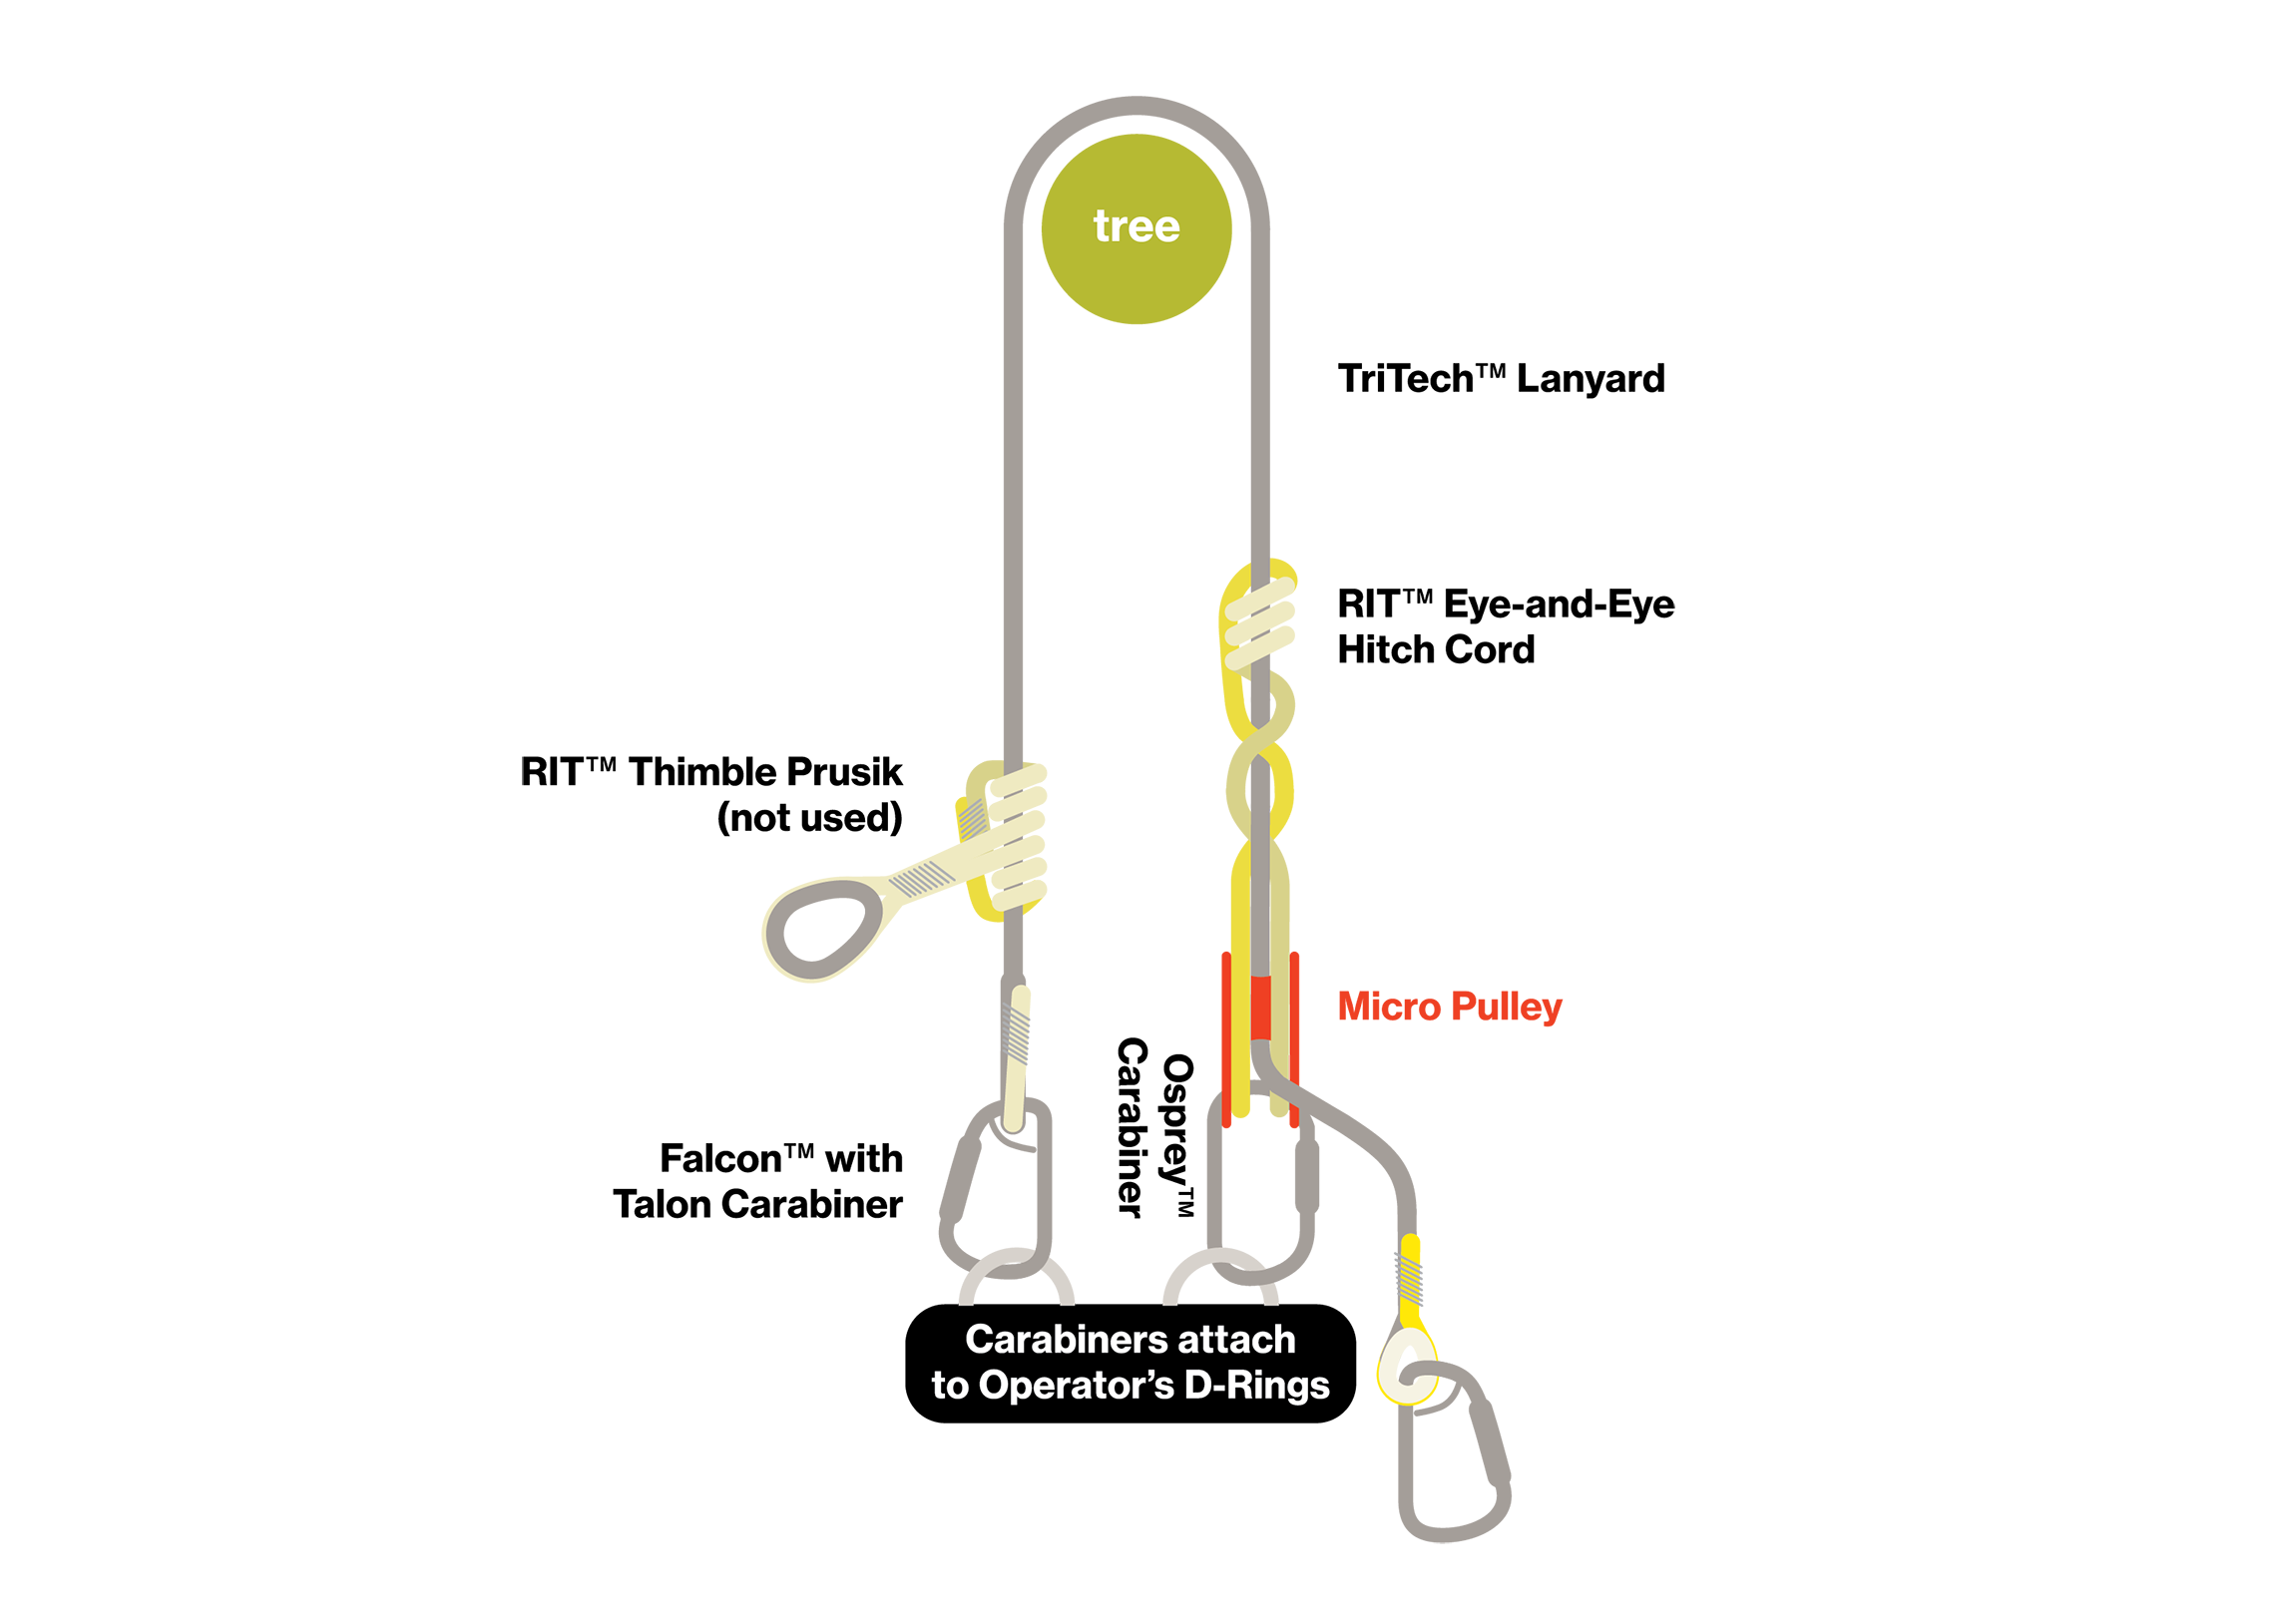 Carabiners attach to Operators D-rings